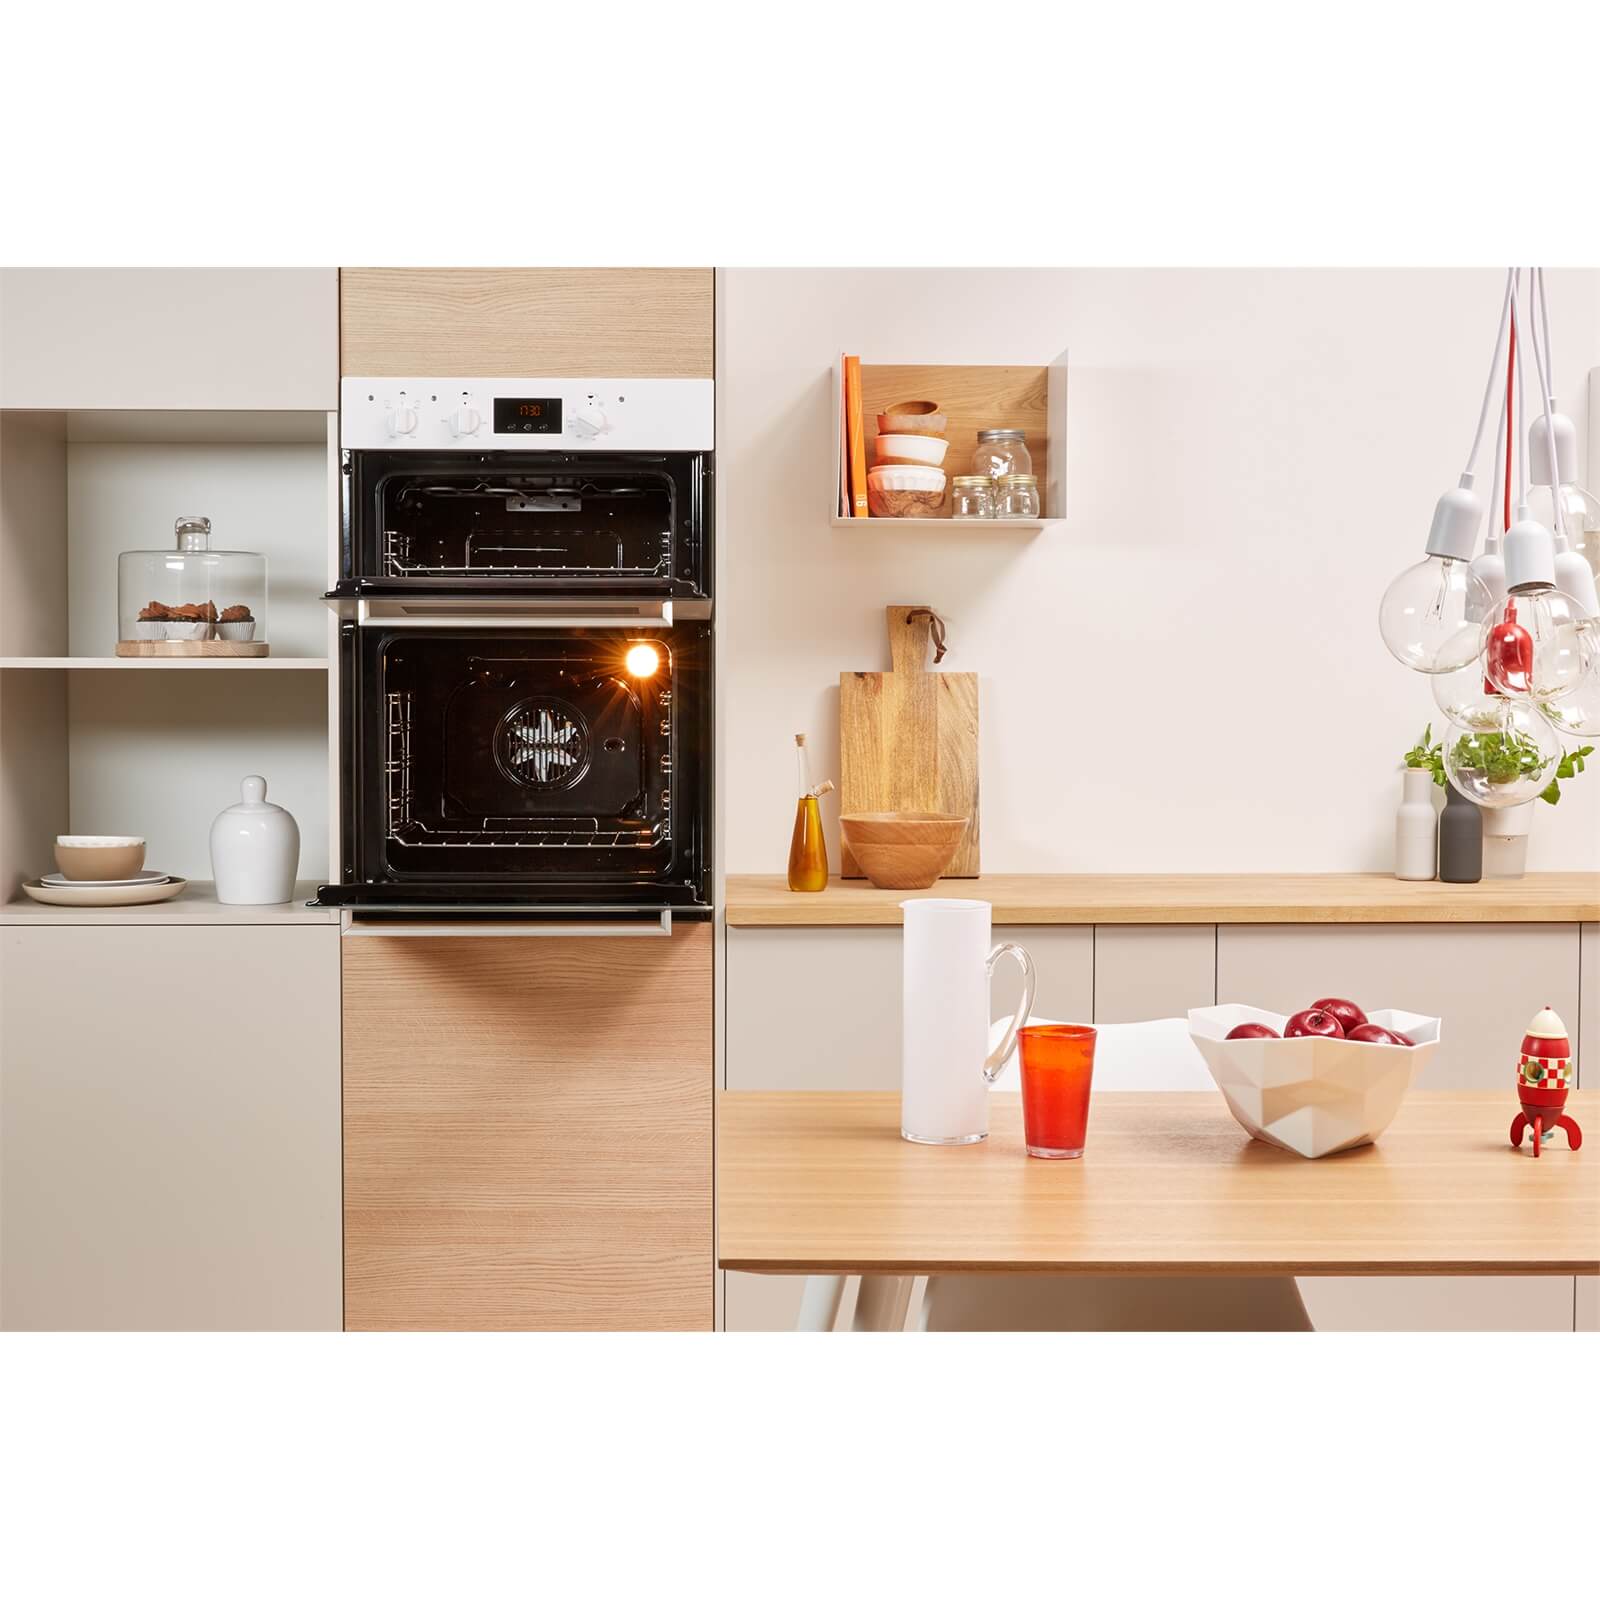 Indesit IDD 6340 WH Built-in Oven - White